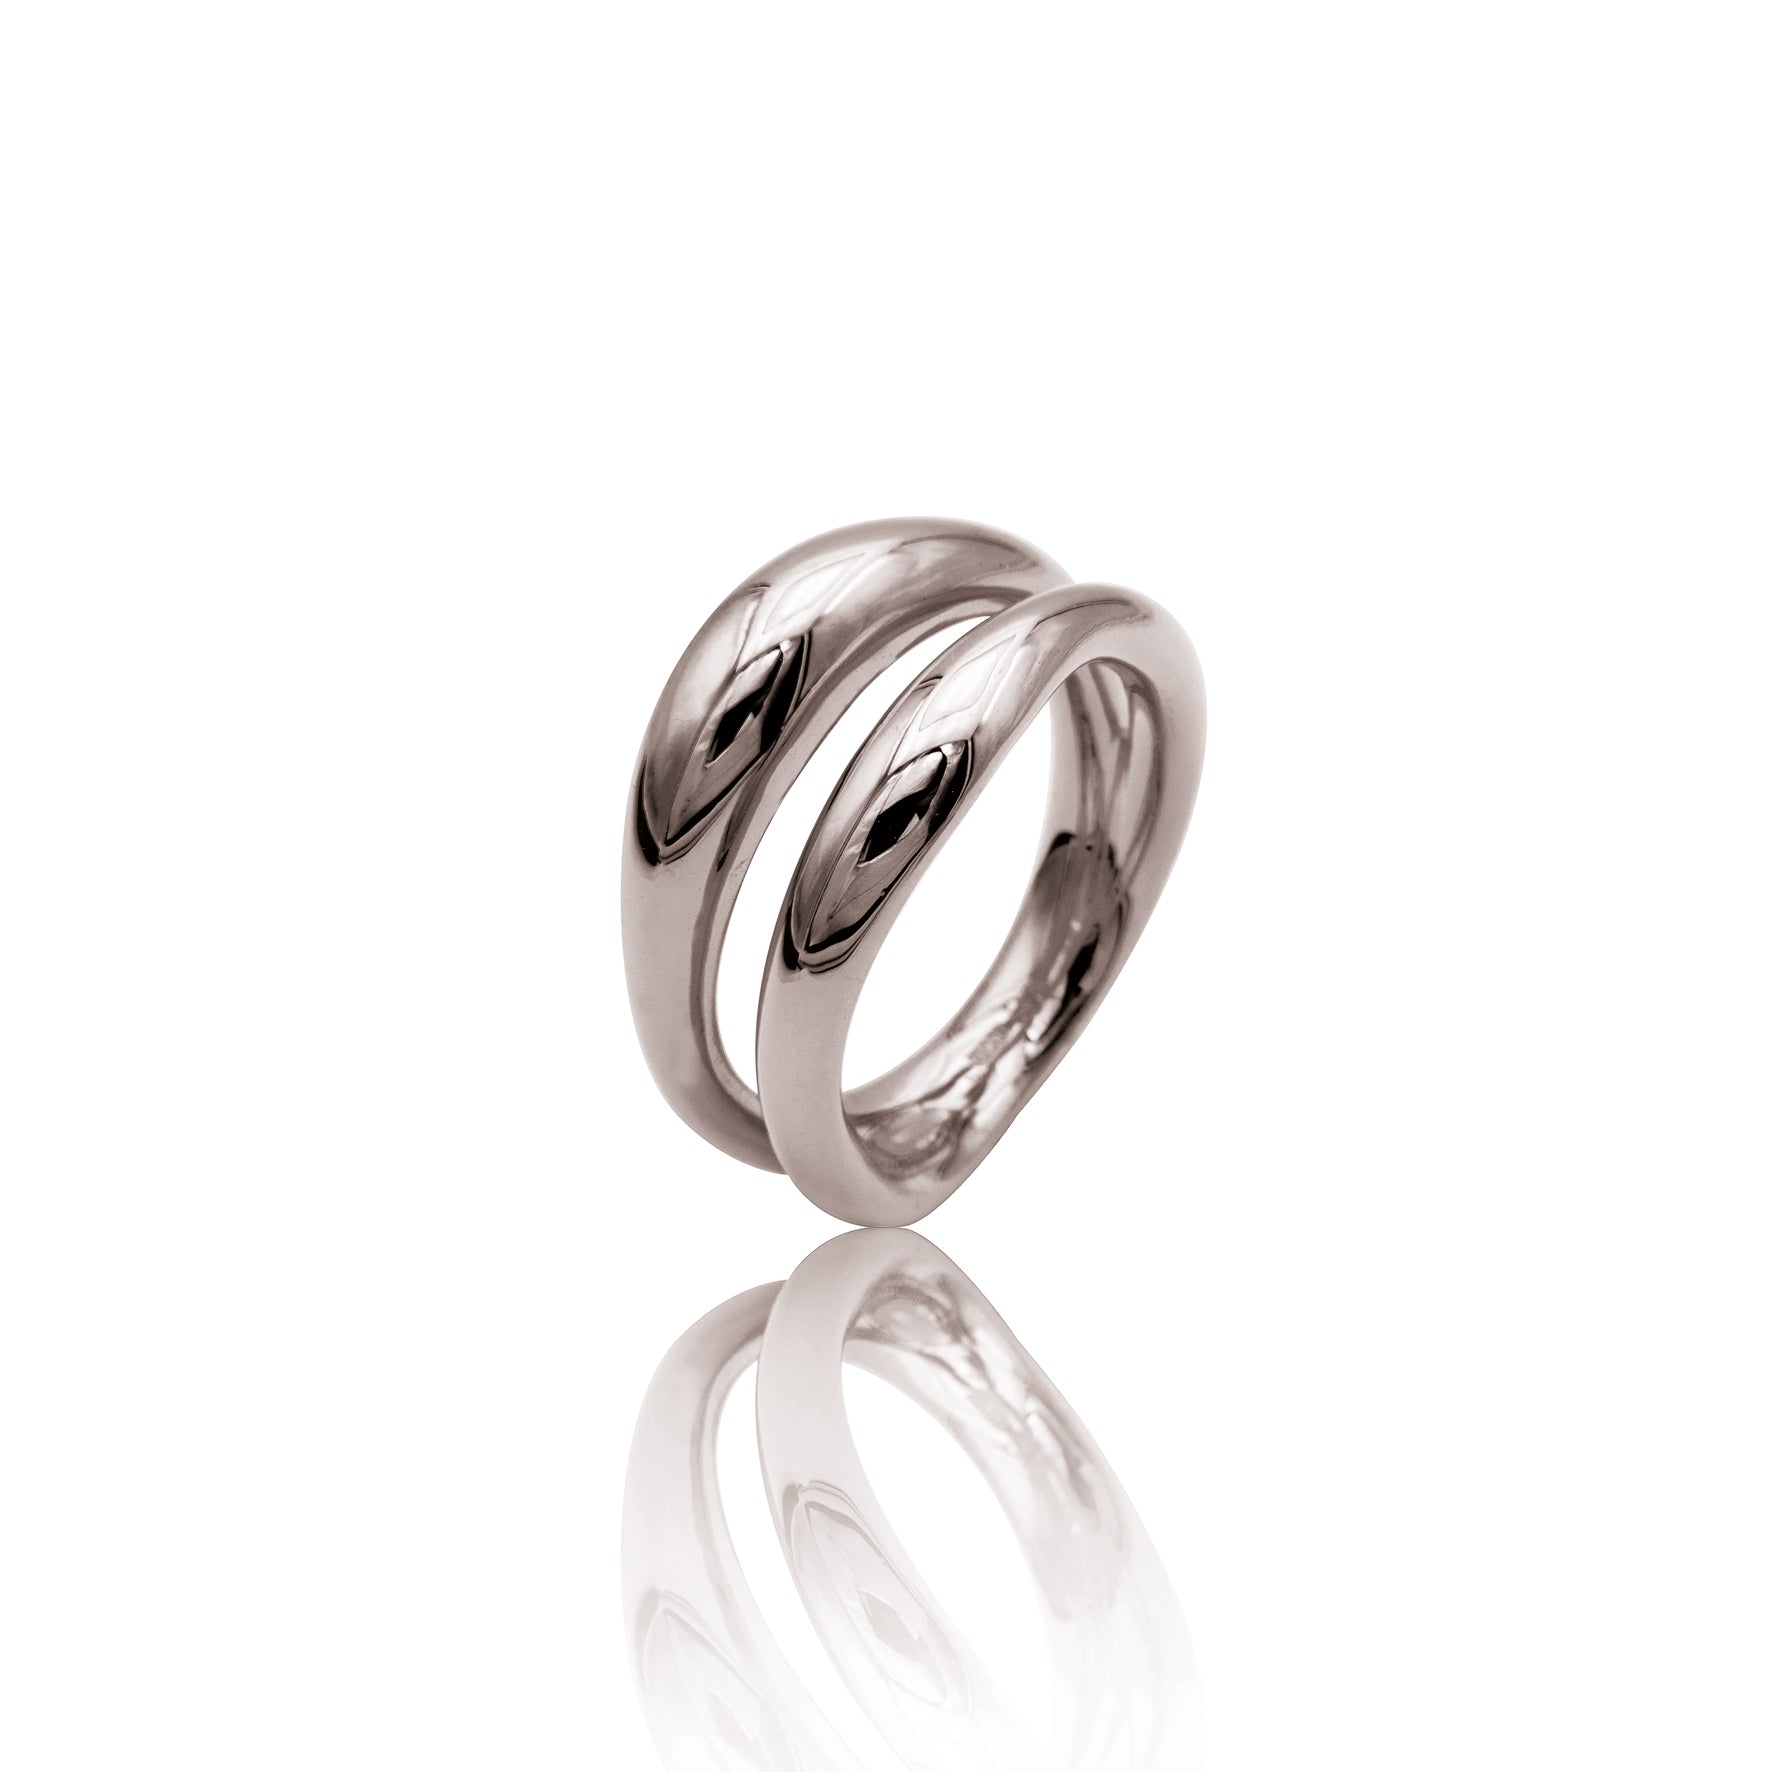 Closed ring "two" 925/-